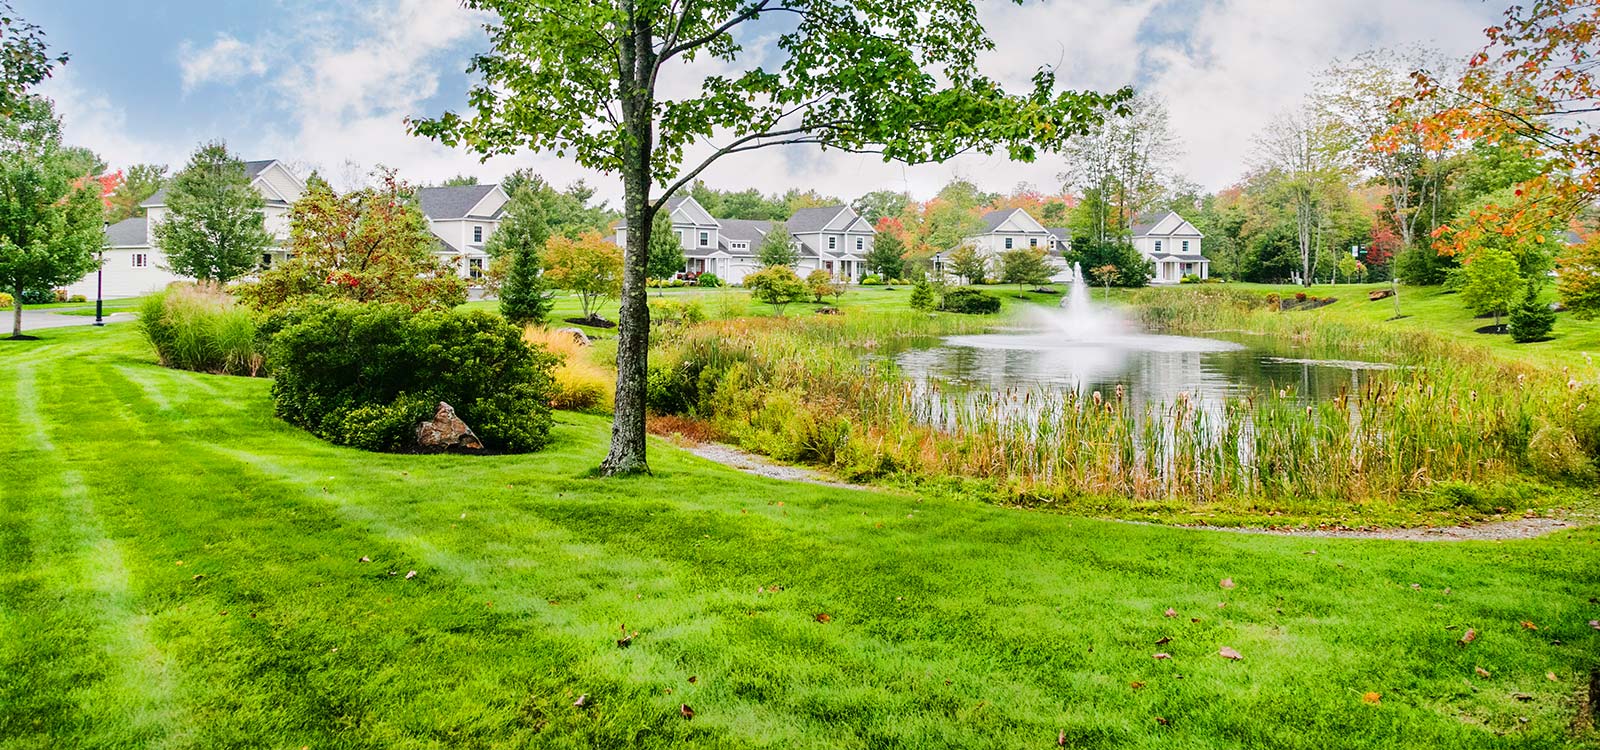 7 Tips for Growing Grass for Commercial Property in Maine